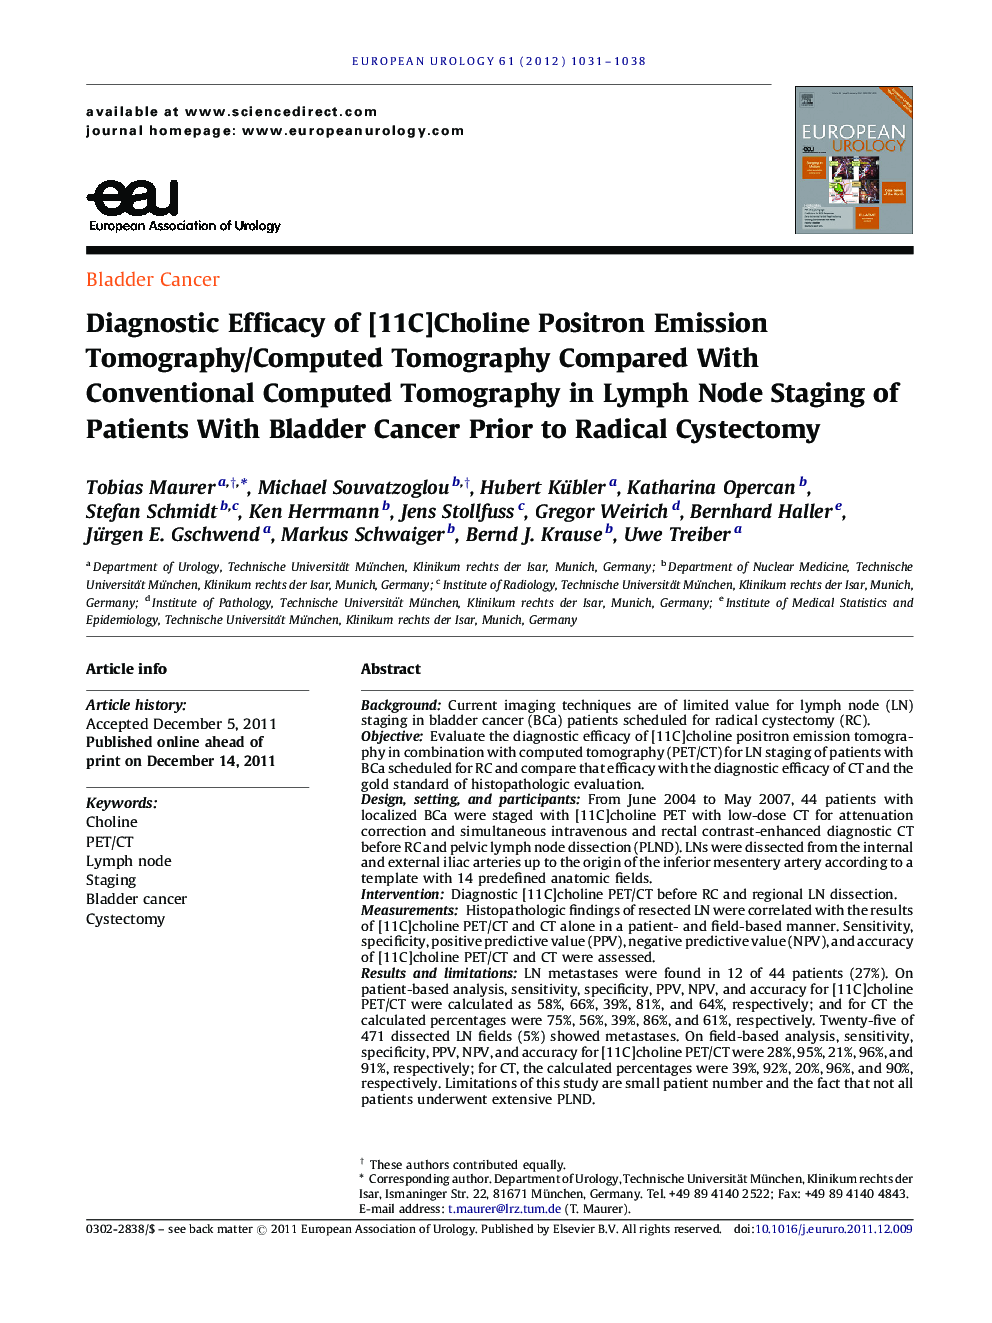 Diagnostic Efficacy of [11C]Choline Positron Emission Tomography/Computed Tomography Compared With Conventional Computed Tomography in Lymph Node Staging of Patients With Bladder Cancer Prior to Radical Cystectomy